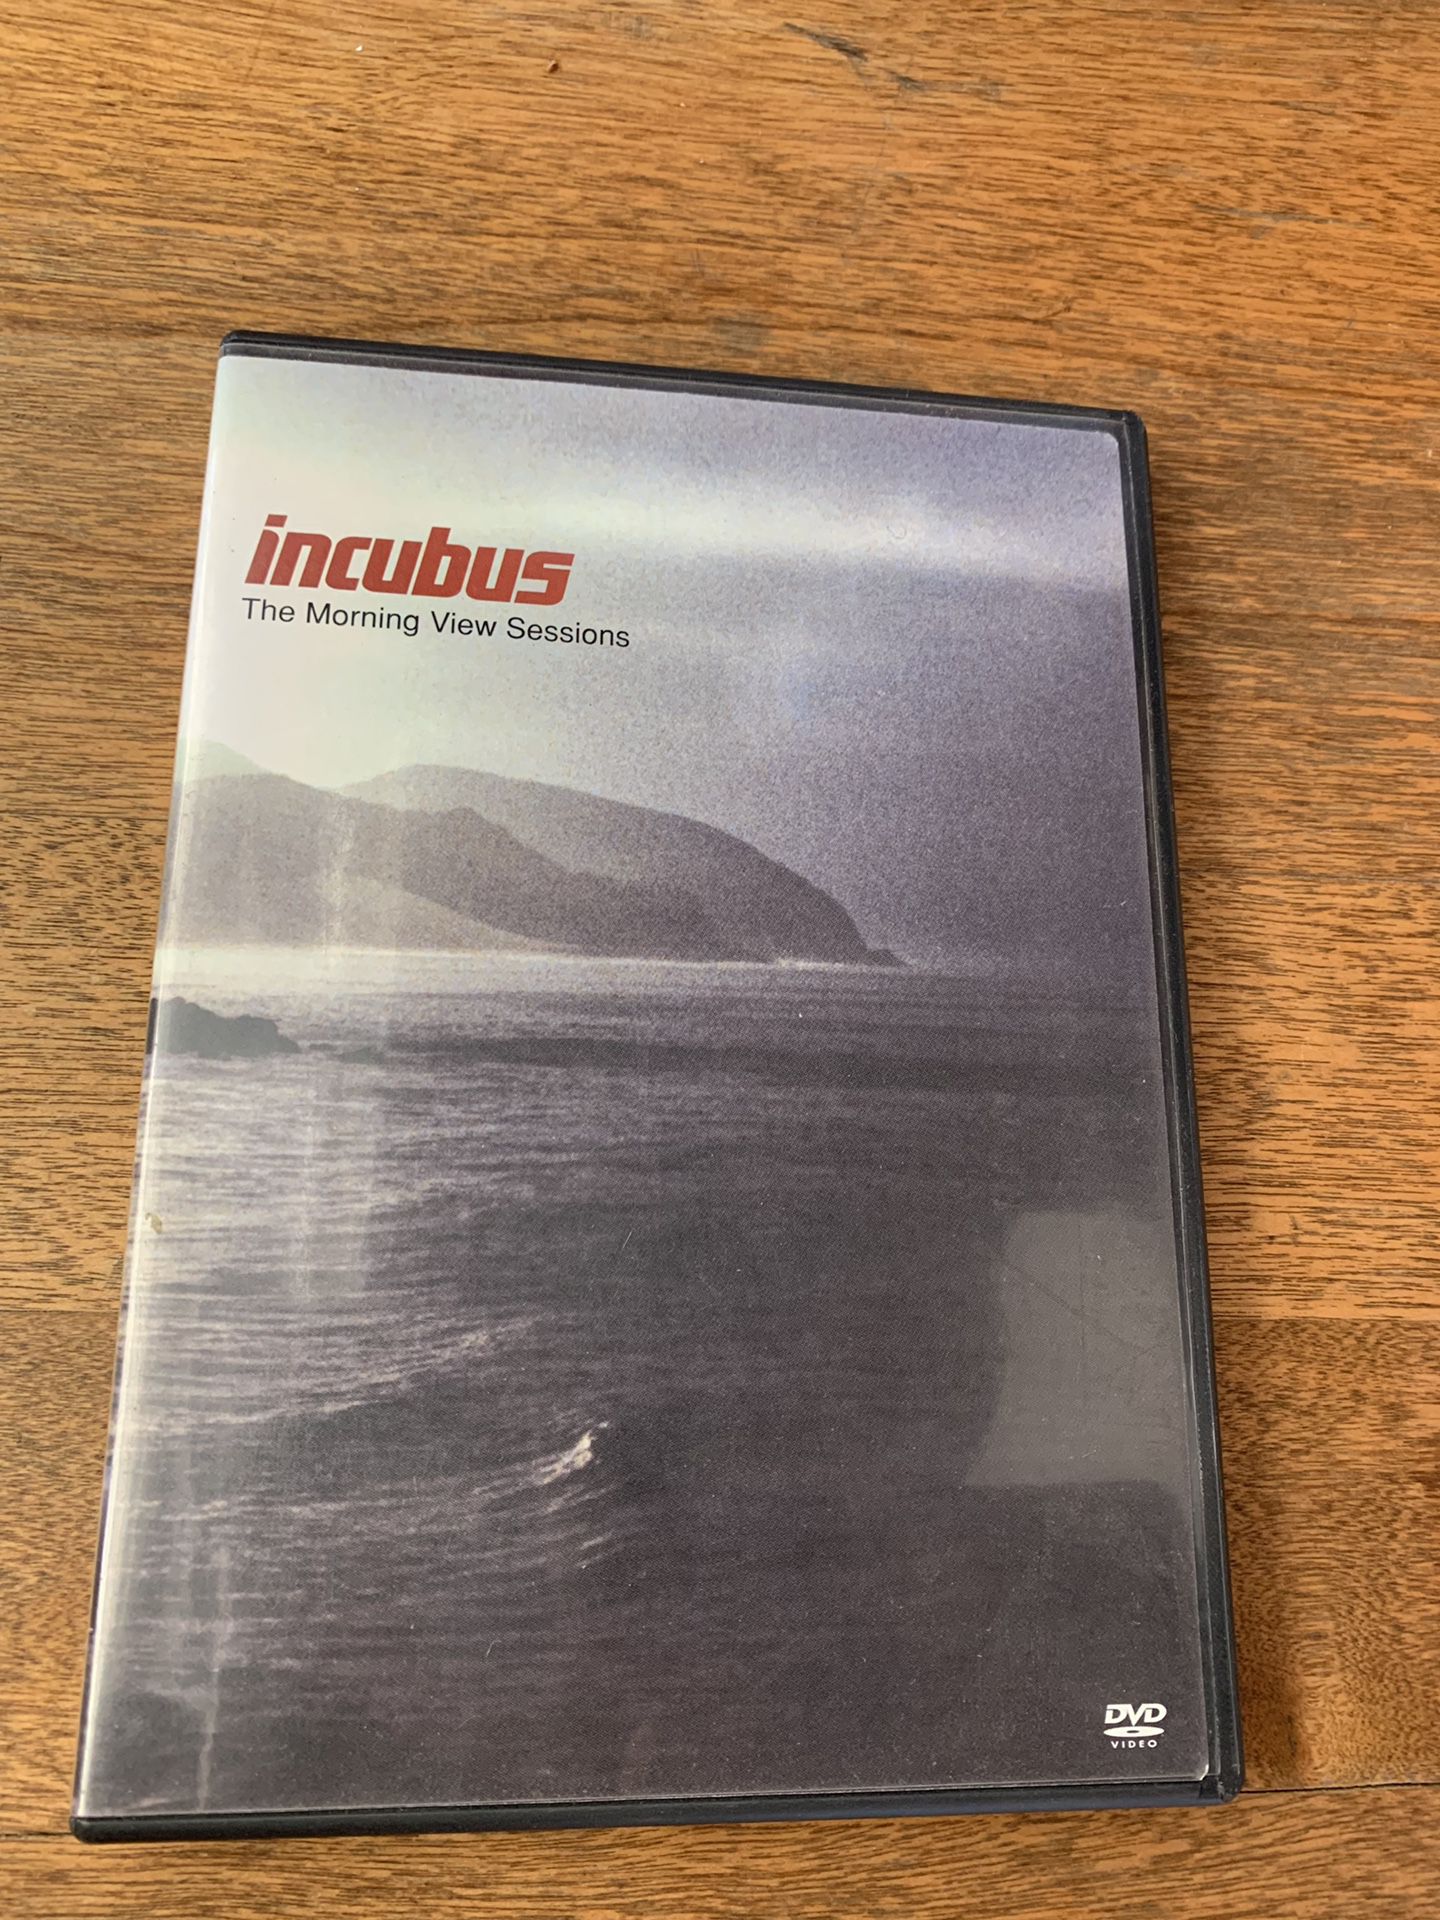 Incubus morning view sessions